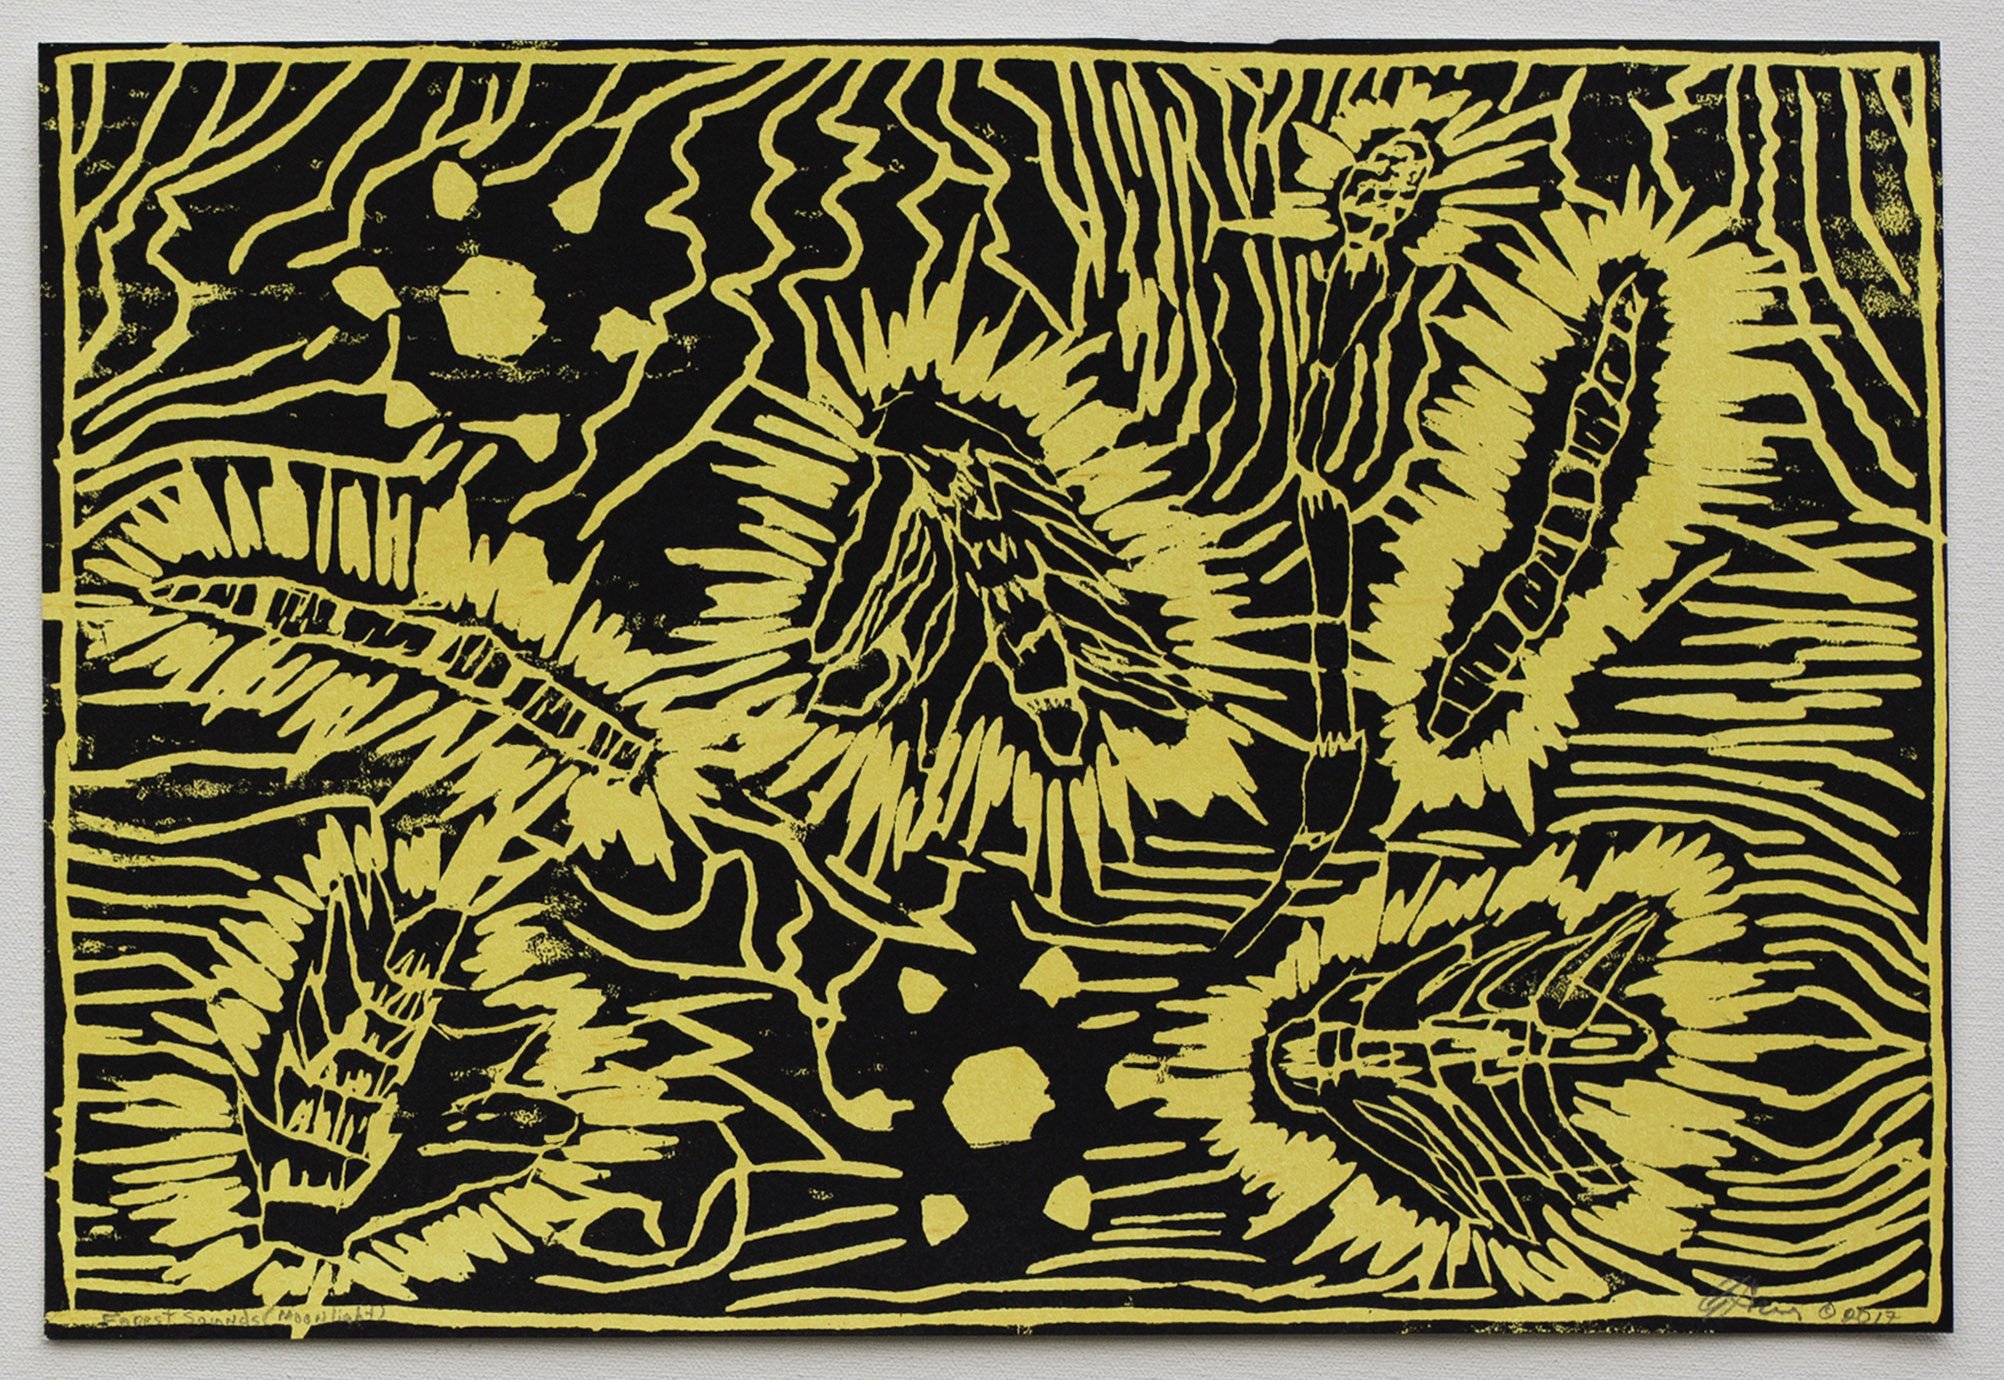 "Forest Sounds (Night)," 2017, wood cut and applied ink, 15" x 22".